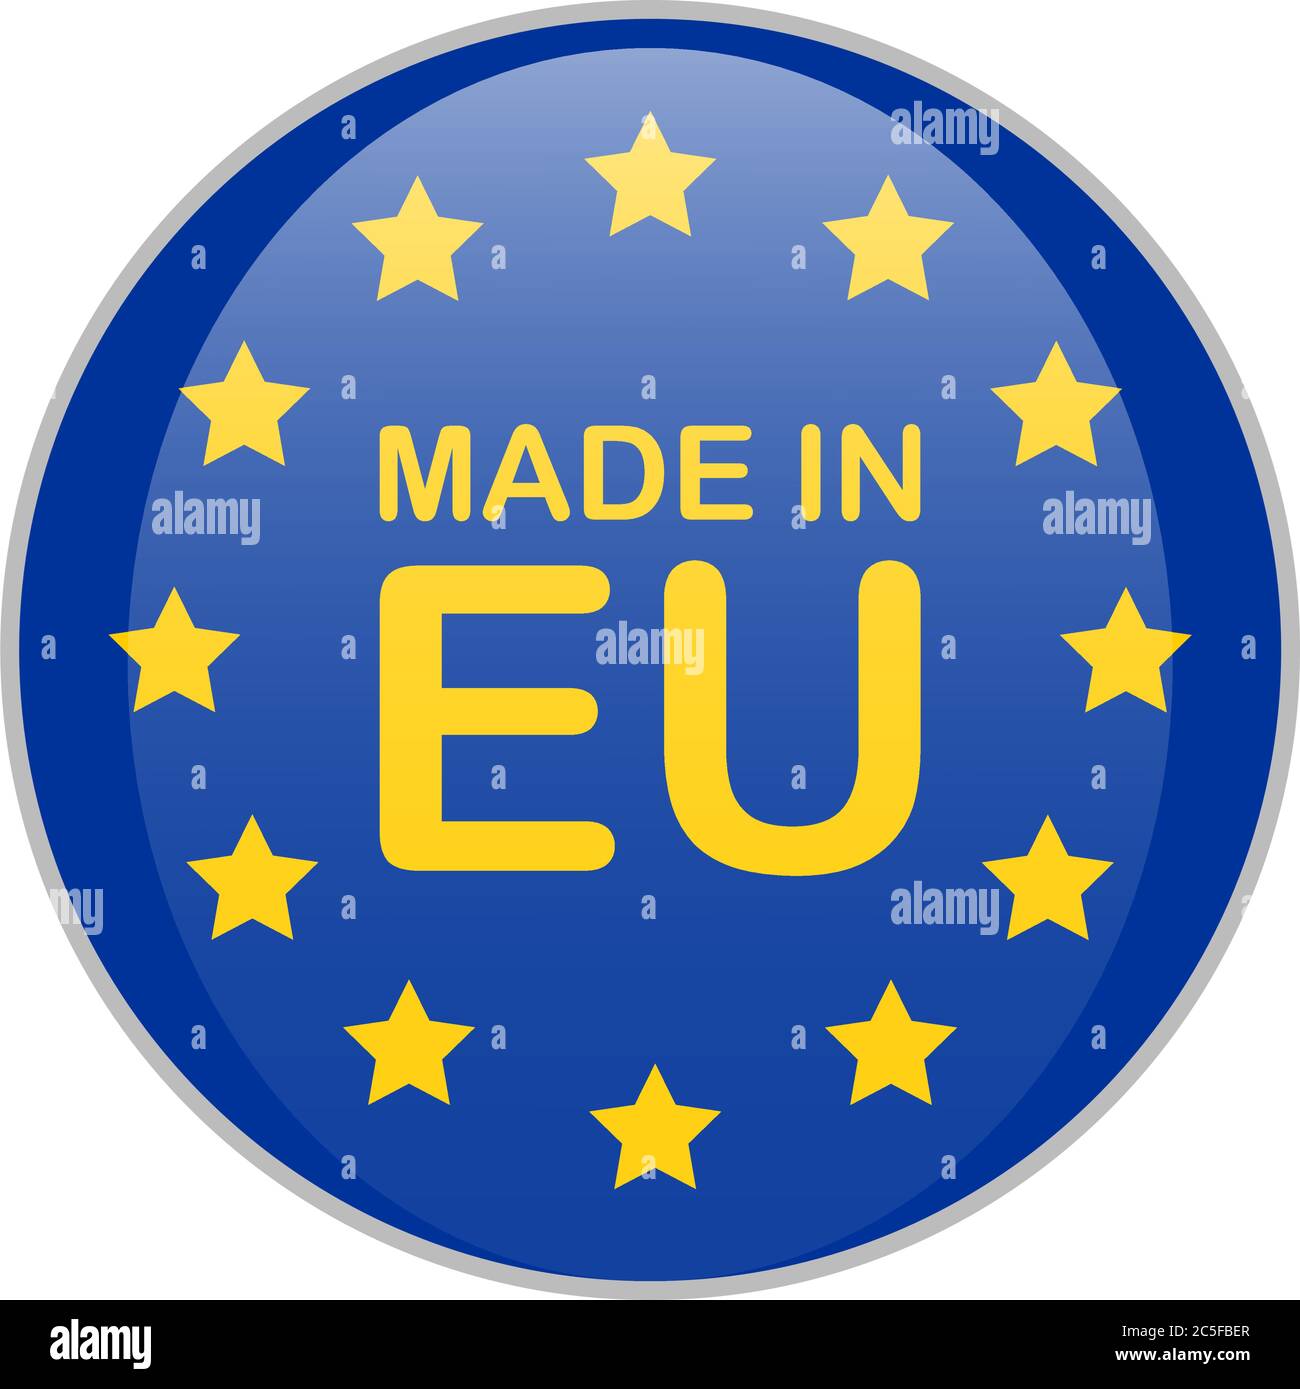 MADE IN EU blue round badge with yellow text and stars. Europe product sign vector illustration isolated on white background. Stock Vector